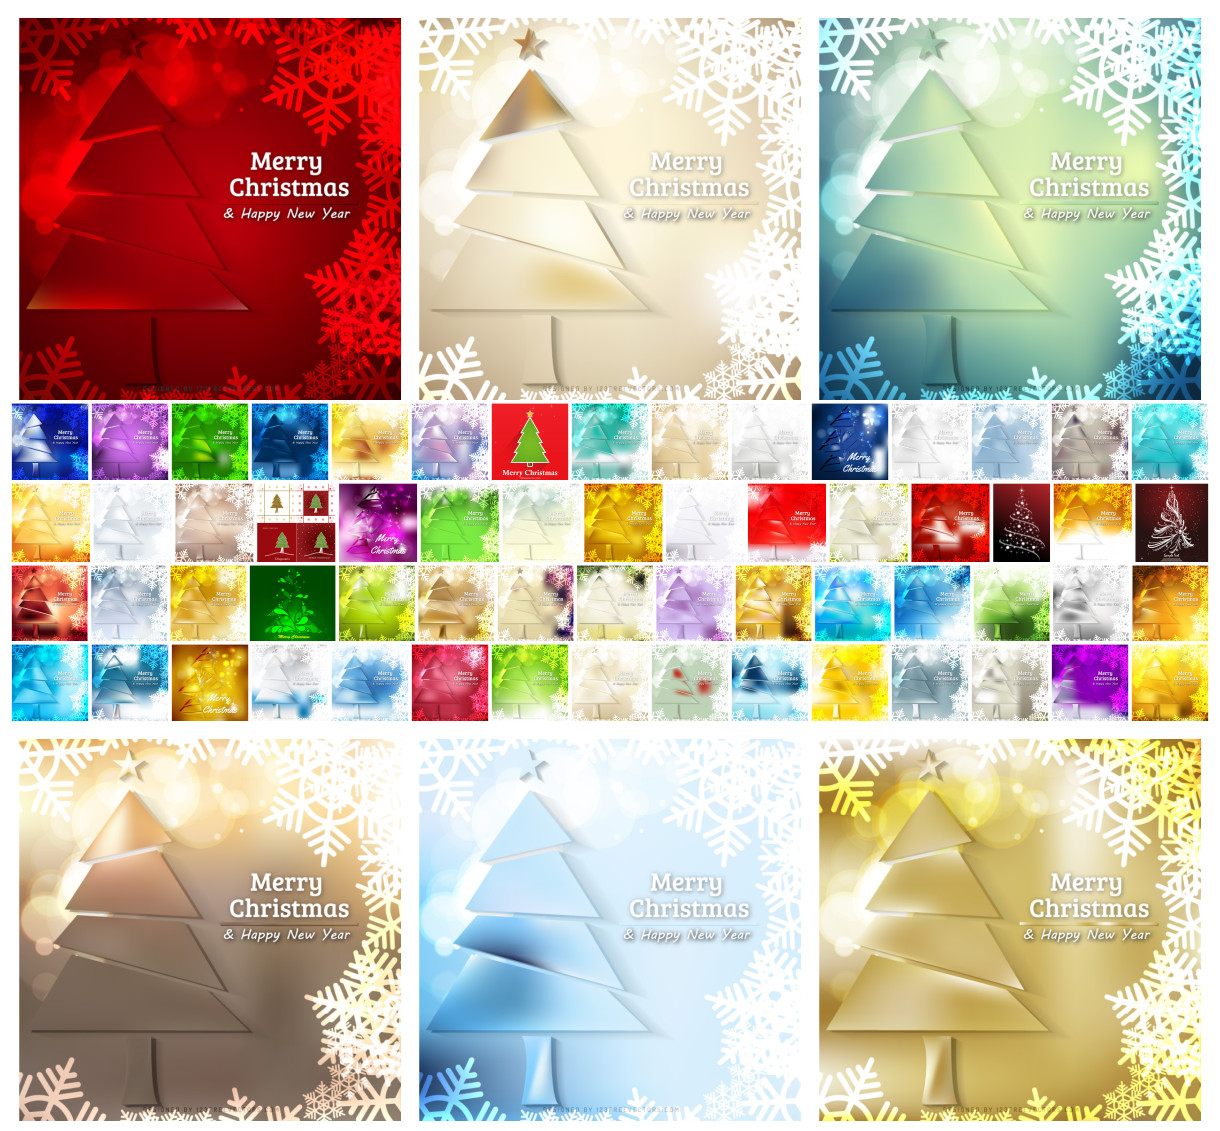 Celebrate the Season: 75 Free Vector Christmas Backgrounds with Xmas Trees and Snowflakes